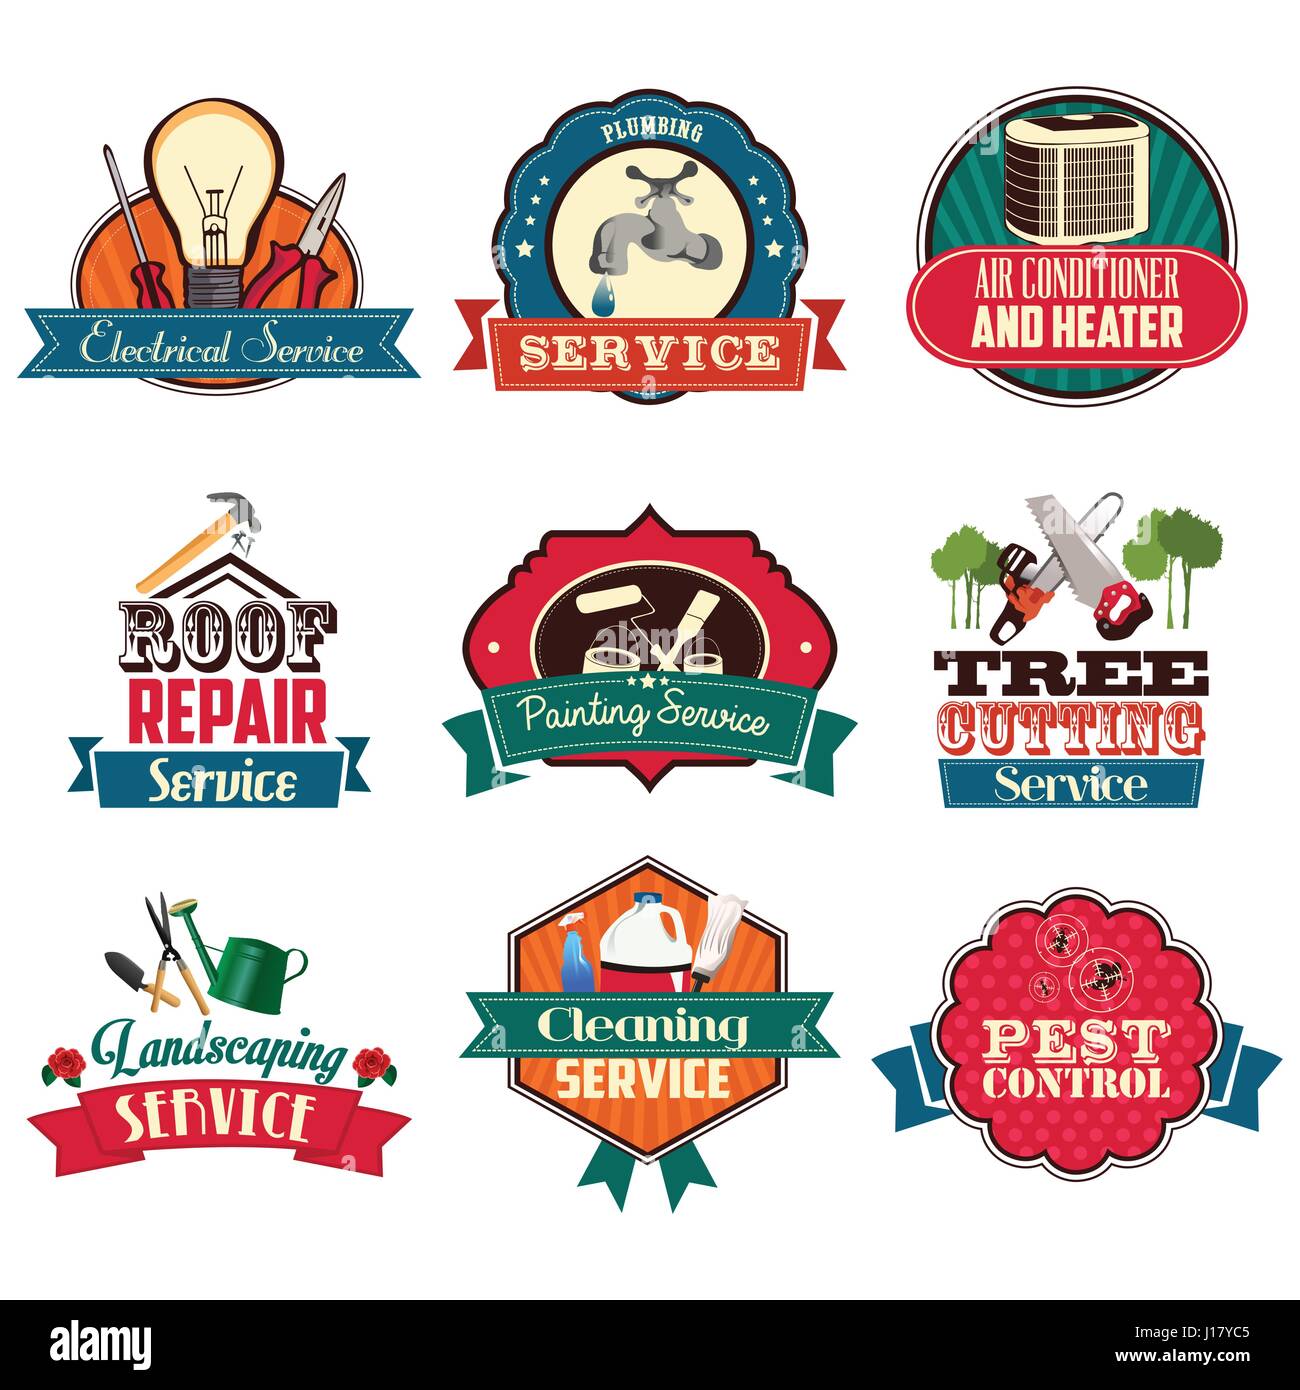 A vector illustration of home repair service icon sets Stock Vector